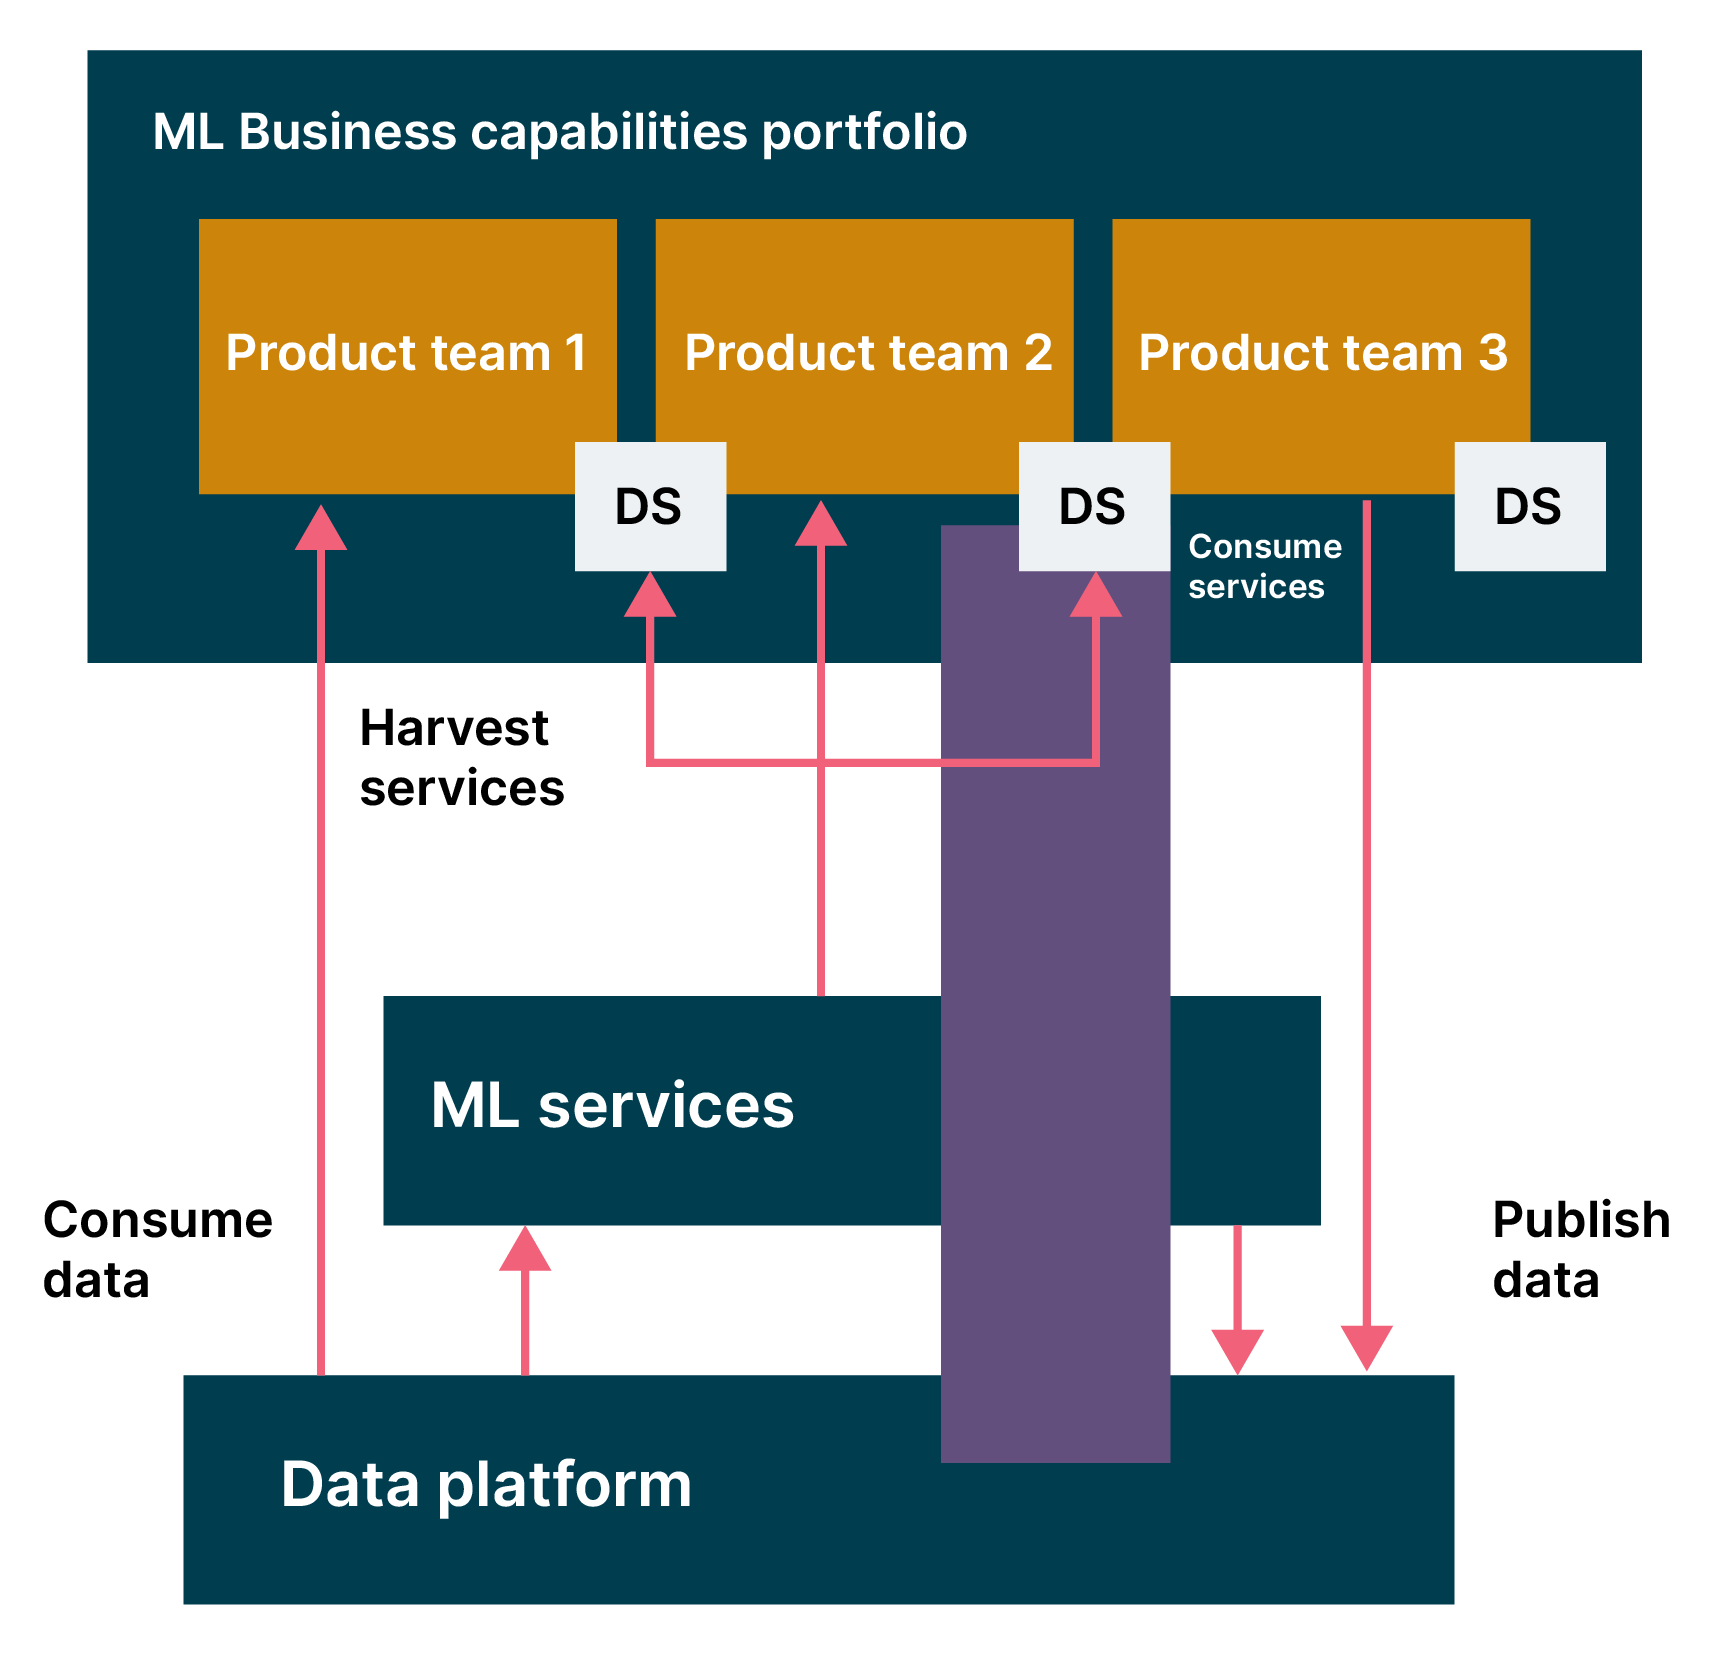 Figure 1: Diagram to show an example of embedding ML practitioners to support stream-aligned product teams. From the bottom there is the data platform, which moves into ML services or direct to product team 1, as Consume data. ML services feeds into DS and product teams 2 and 3. Product teams are grouped under ML Business capabilities protfolio. This flows downstream back to the Data platform as Publish data. 